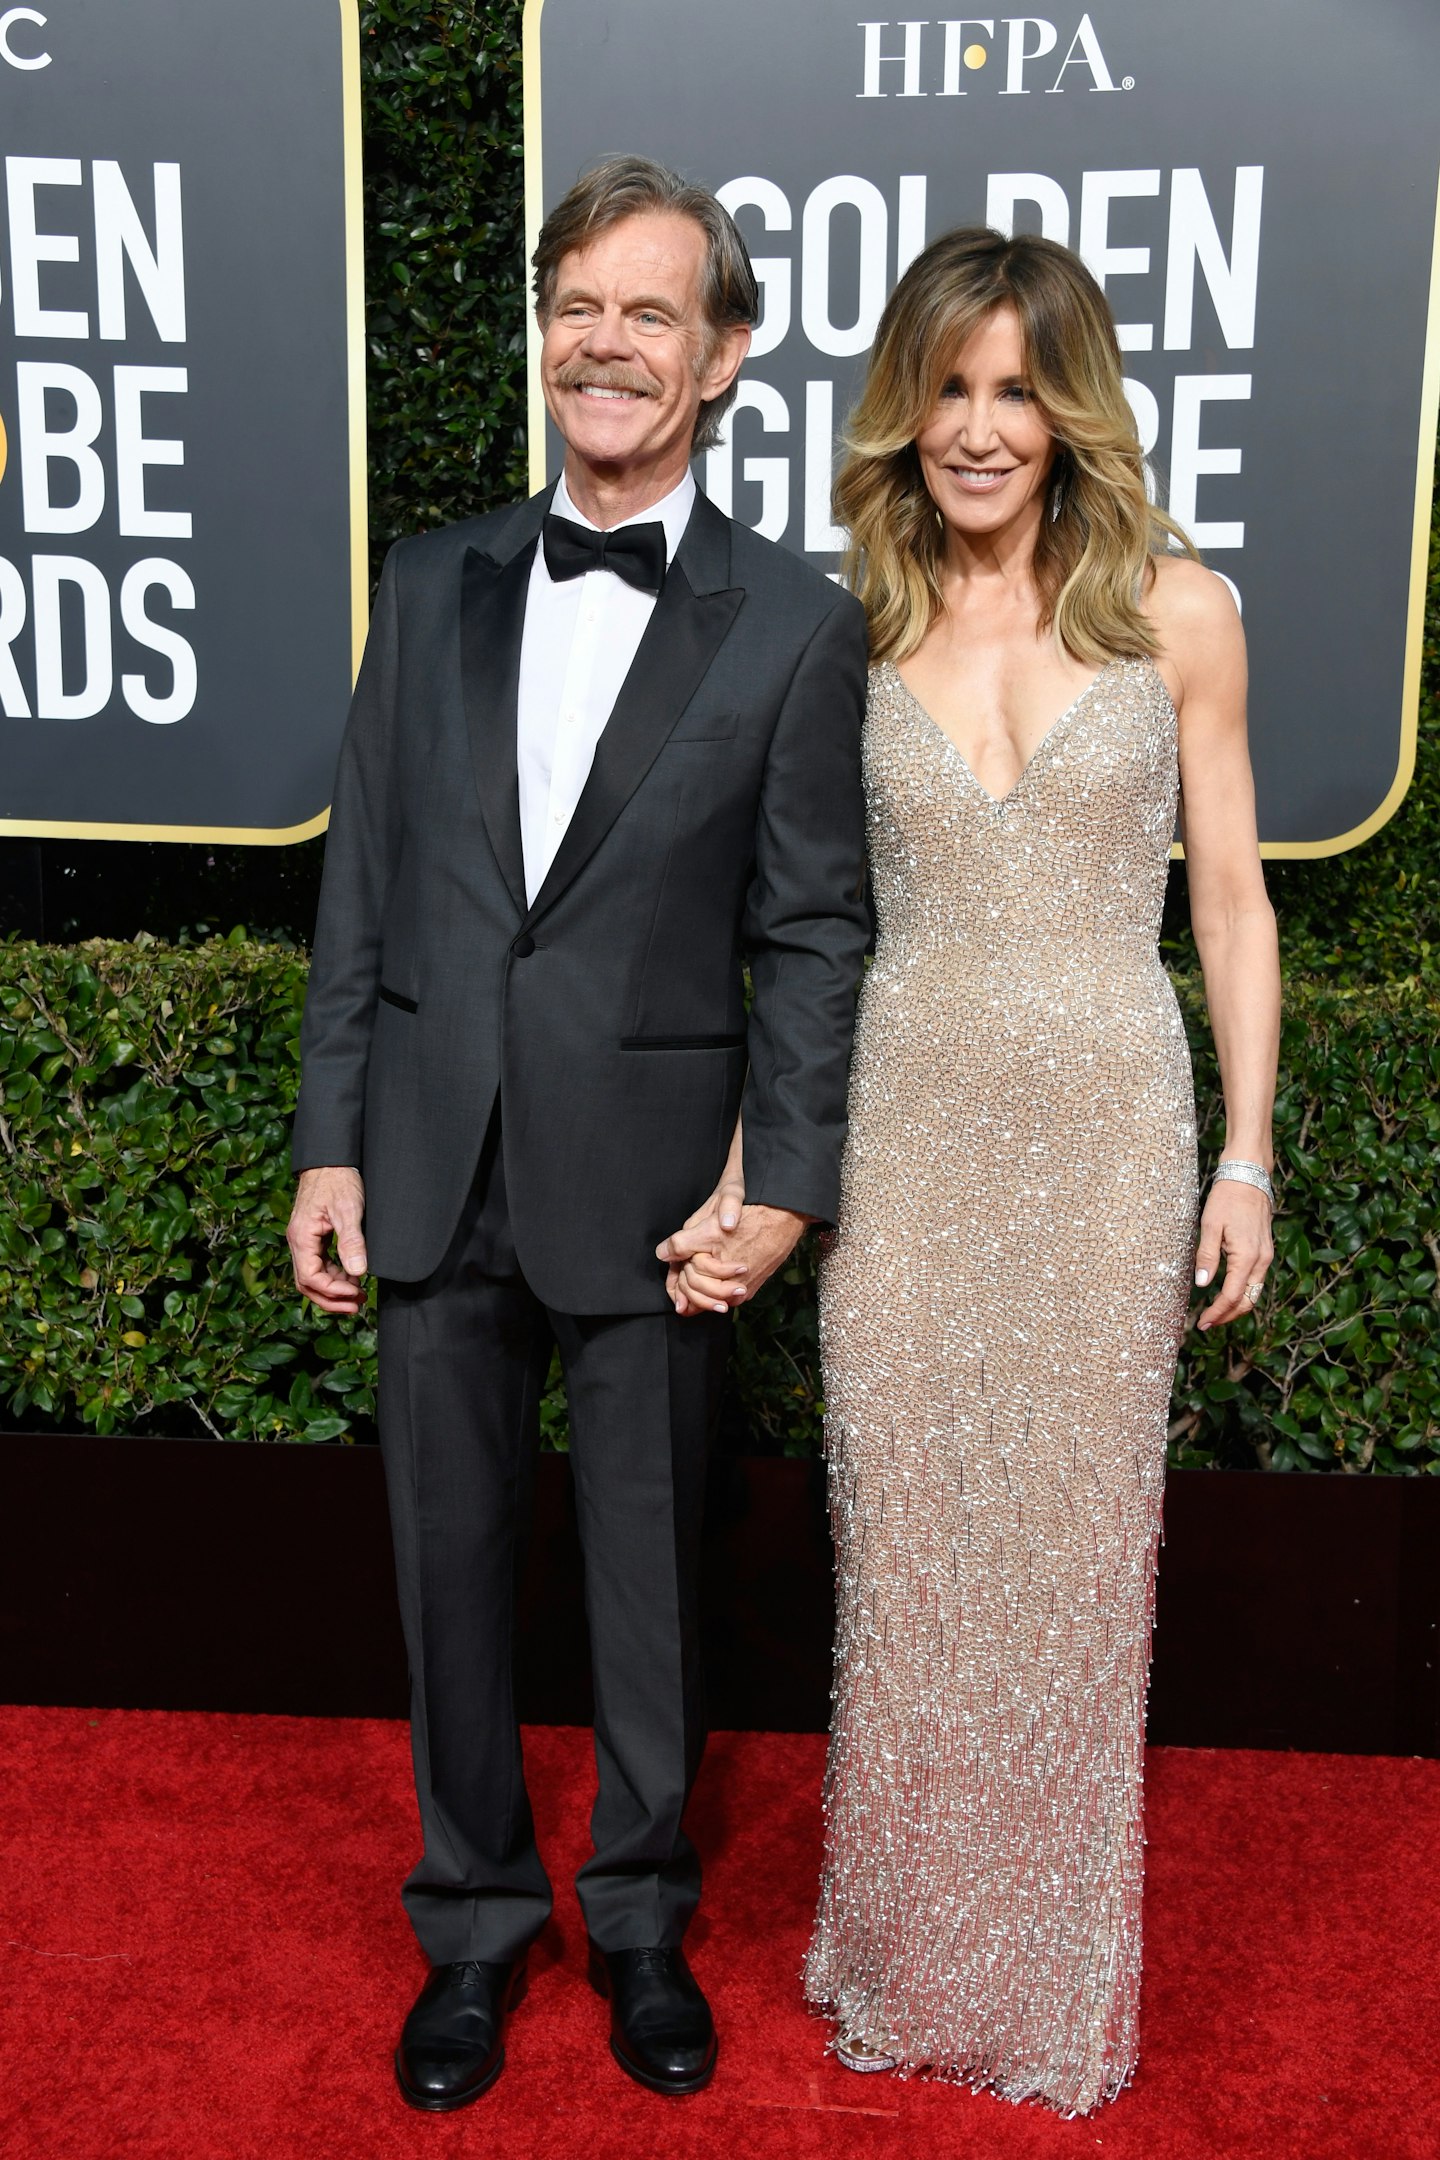 Felicity Huffman and William H. Macy at the 2019 Golden Globes